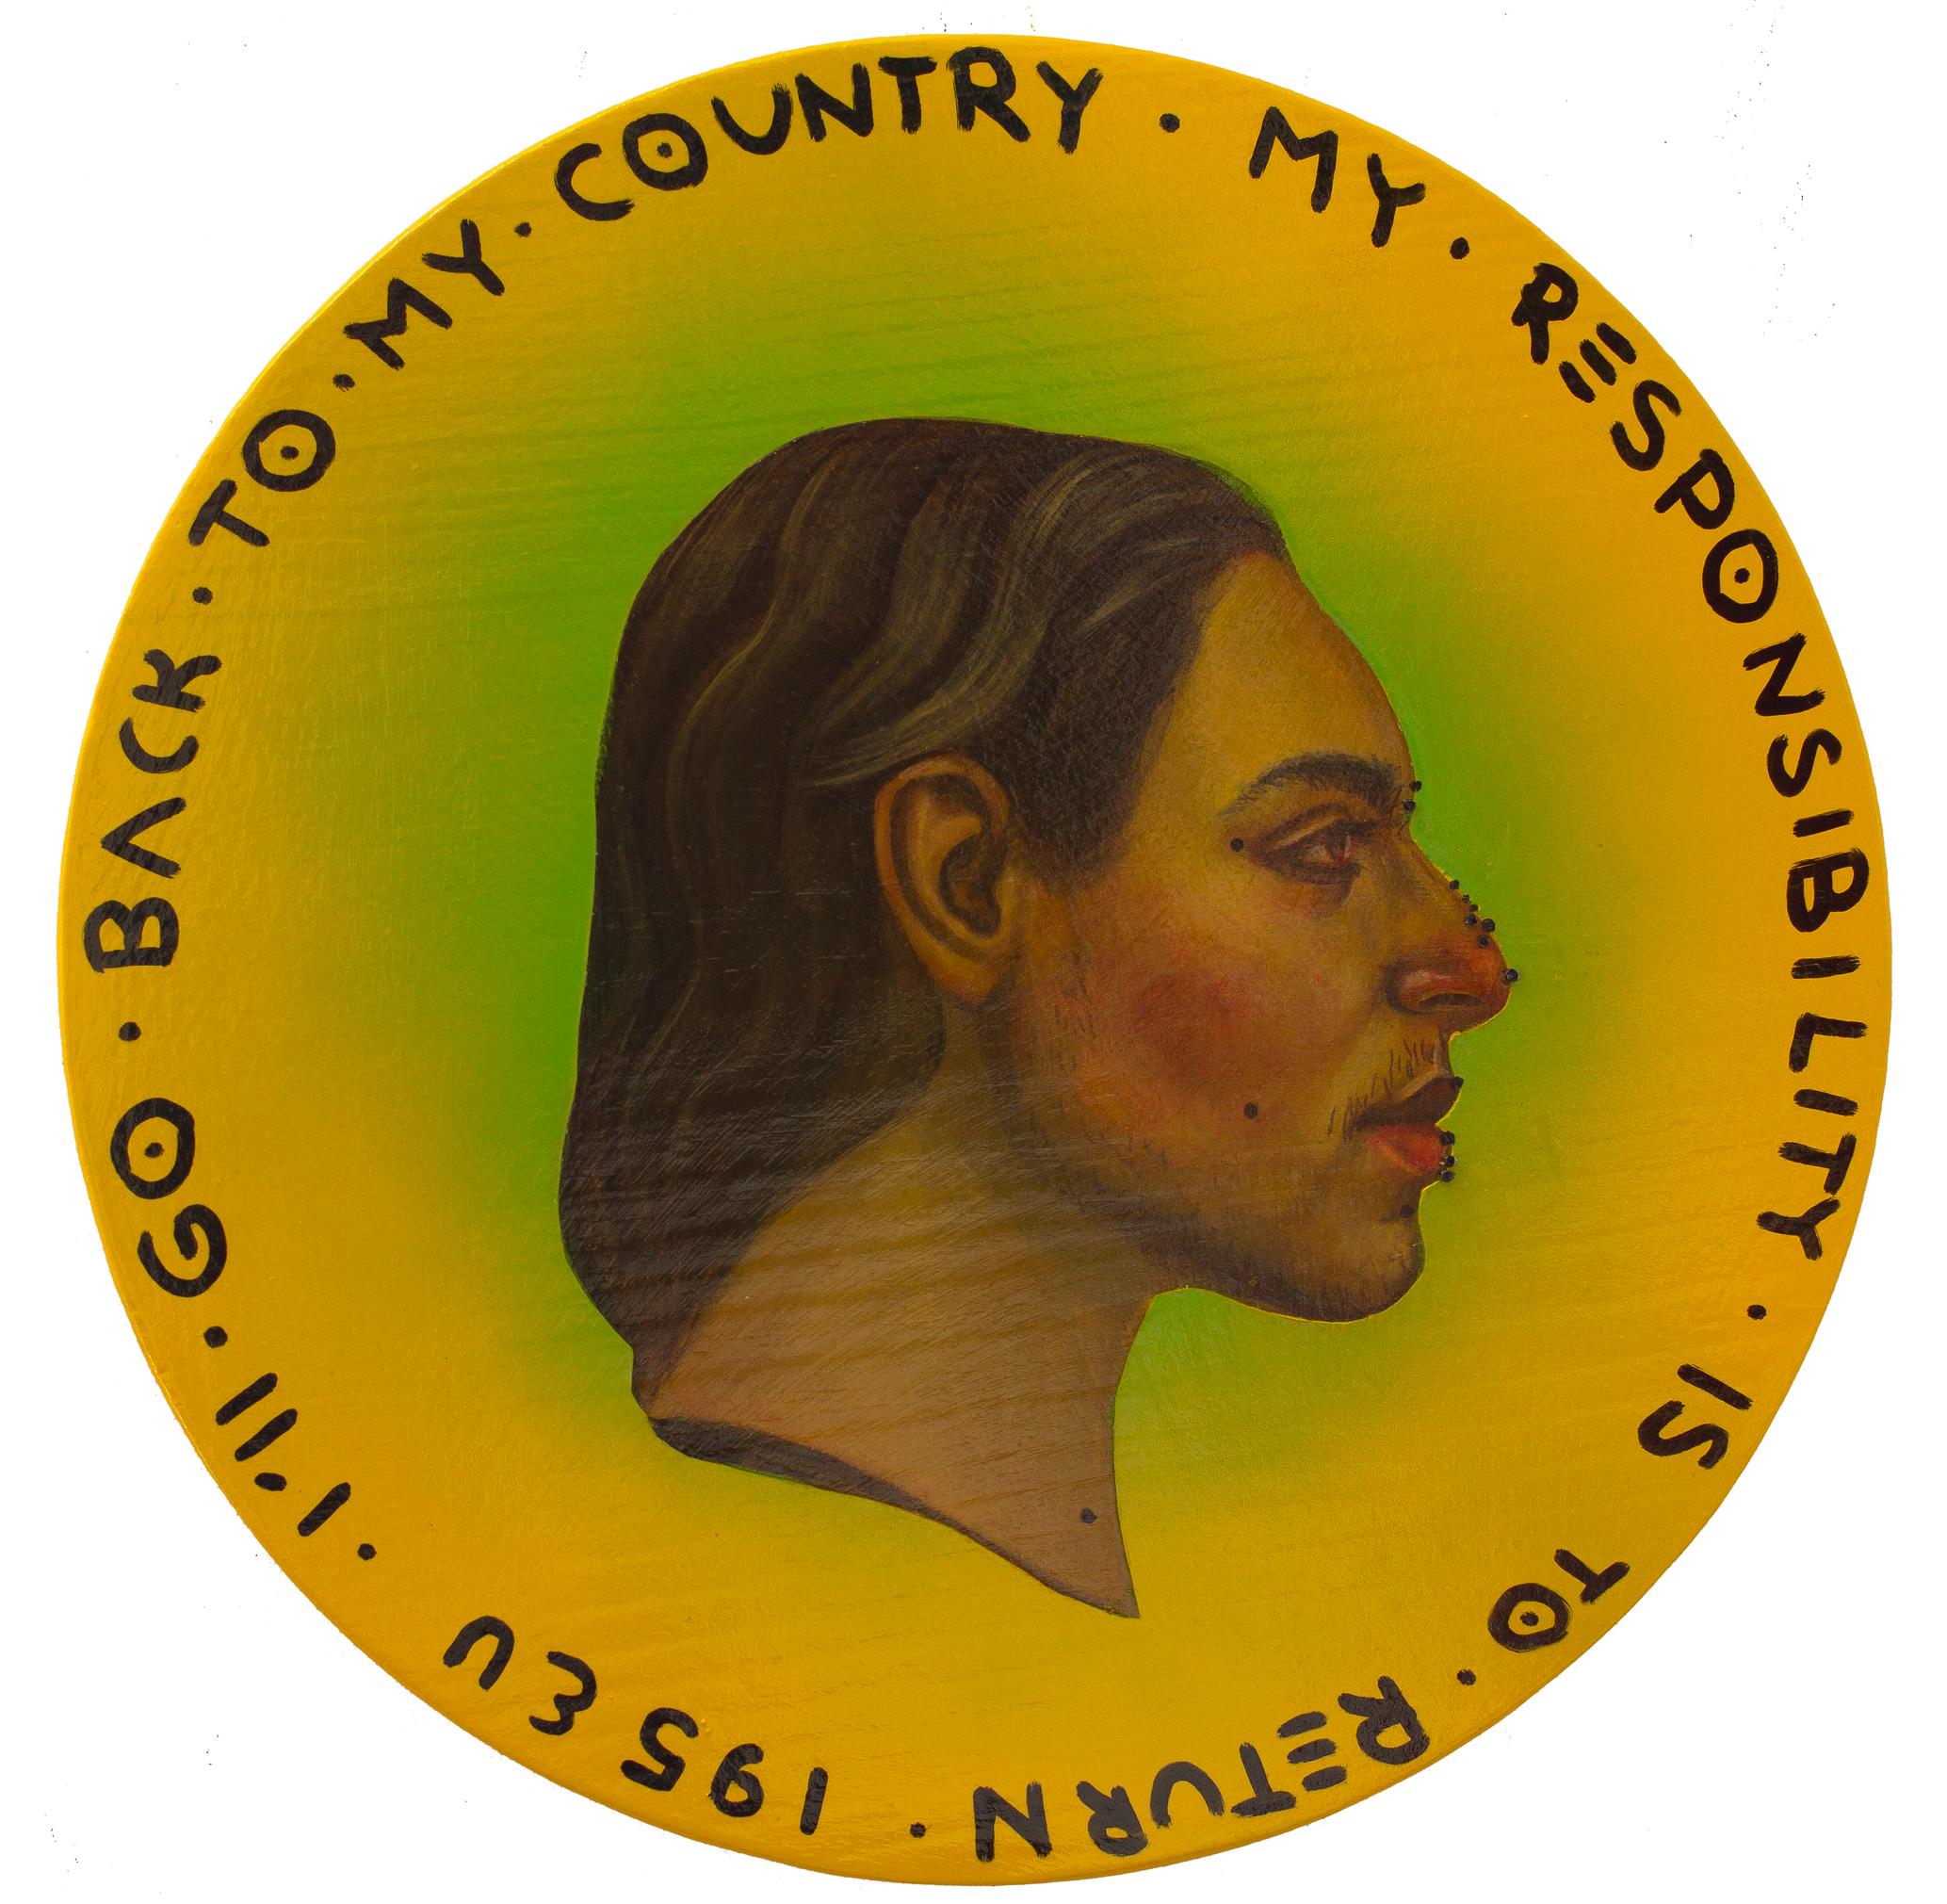 Yellow and Green Fluor Coin. Side Profile Male Portrait On Wood. "Currency #179" - Mixed Media Art by Natasha Lelenco